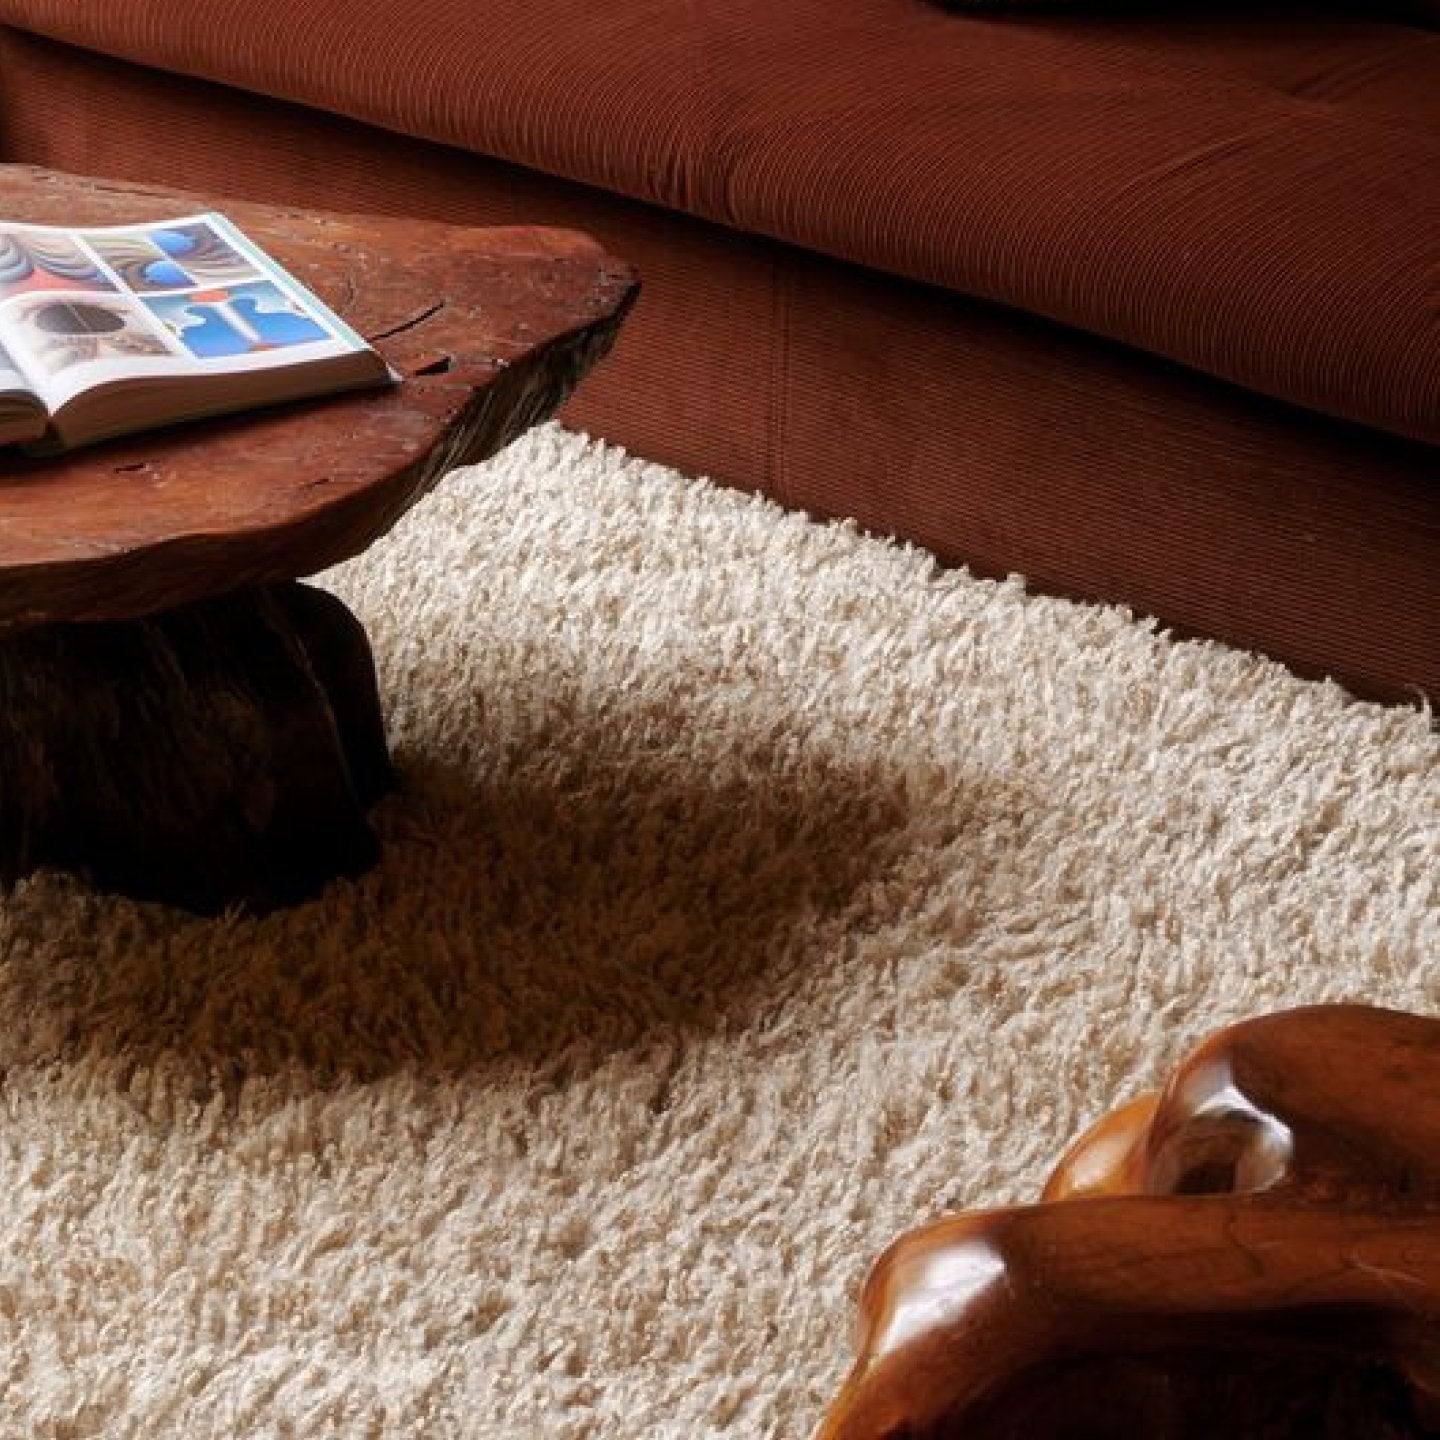 Shag style rug in a living room